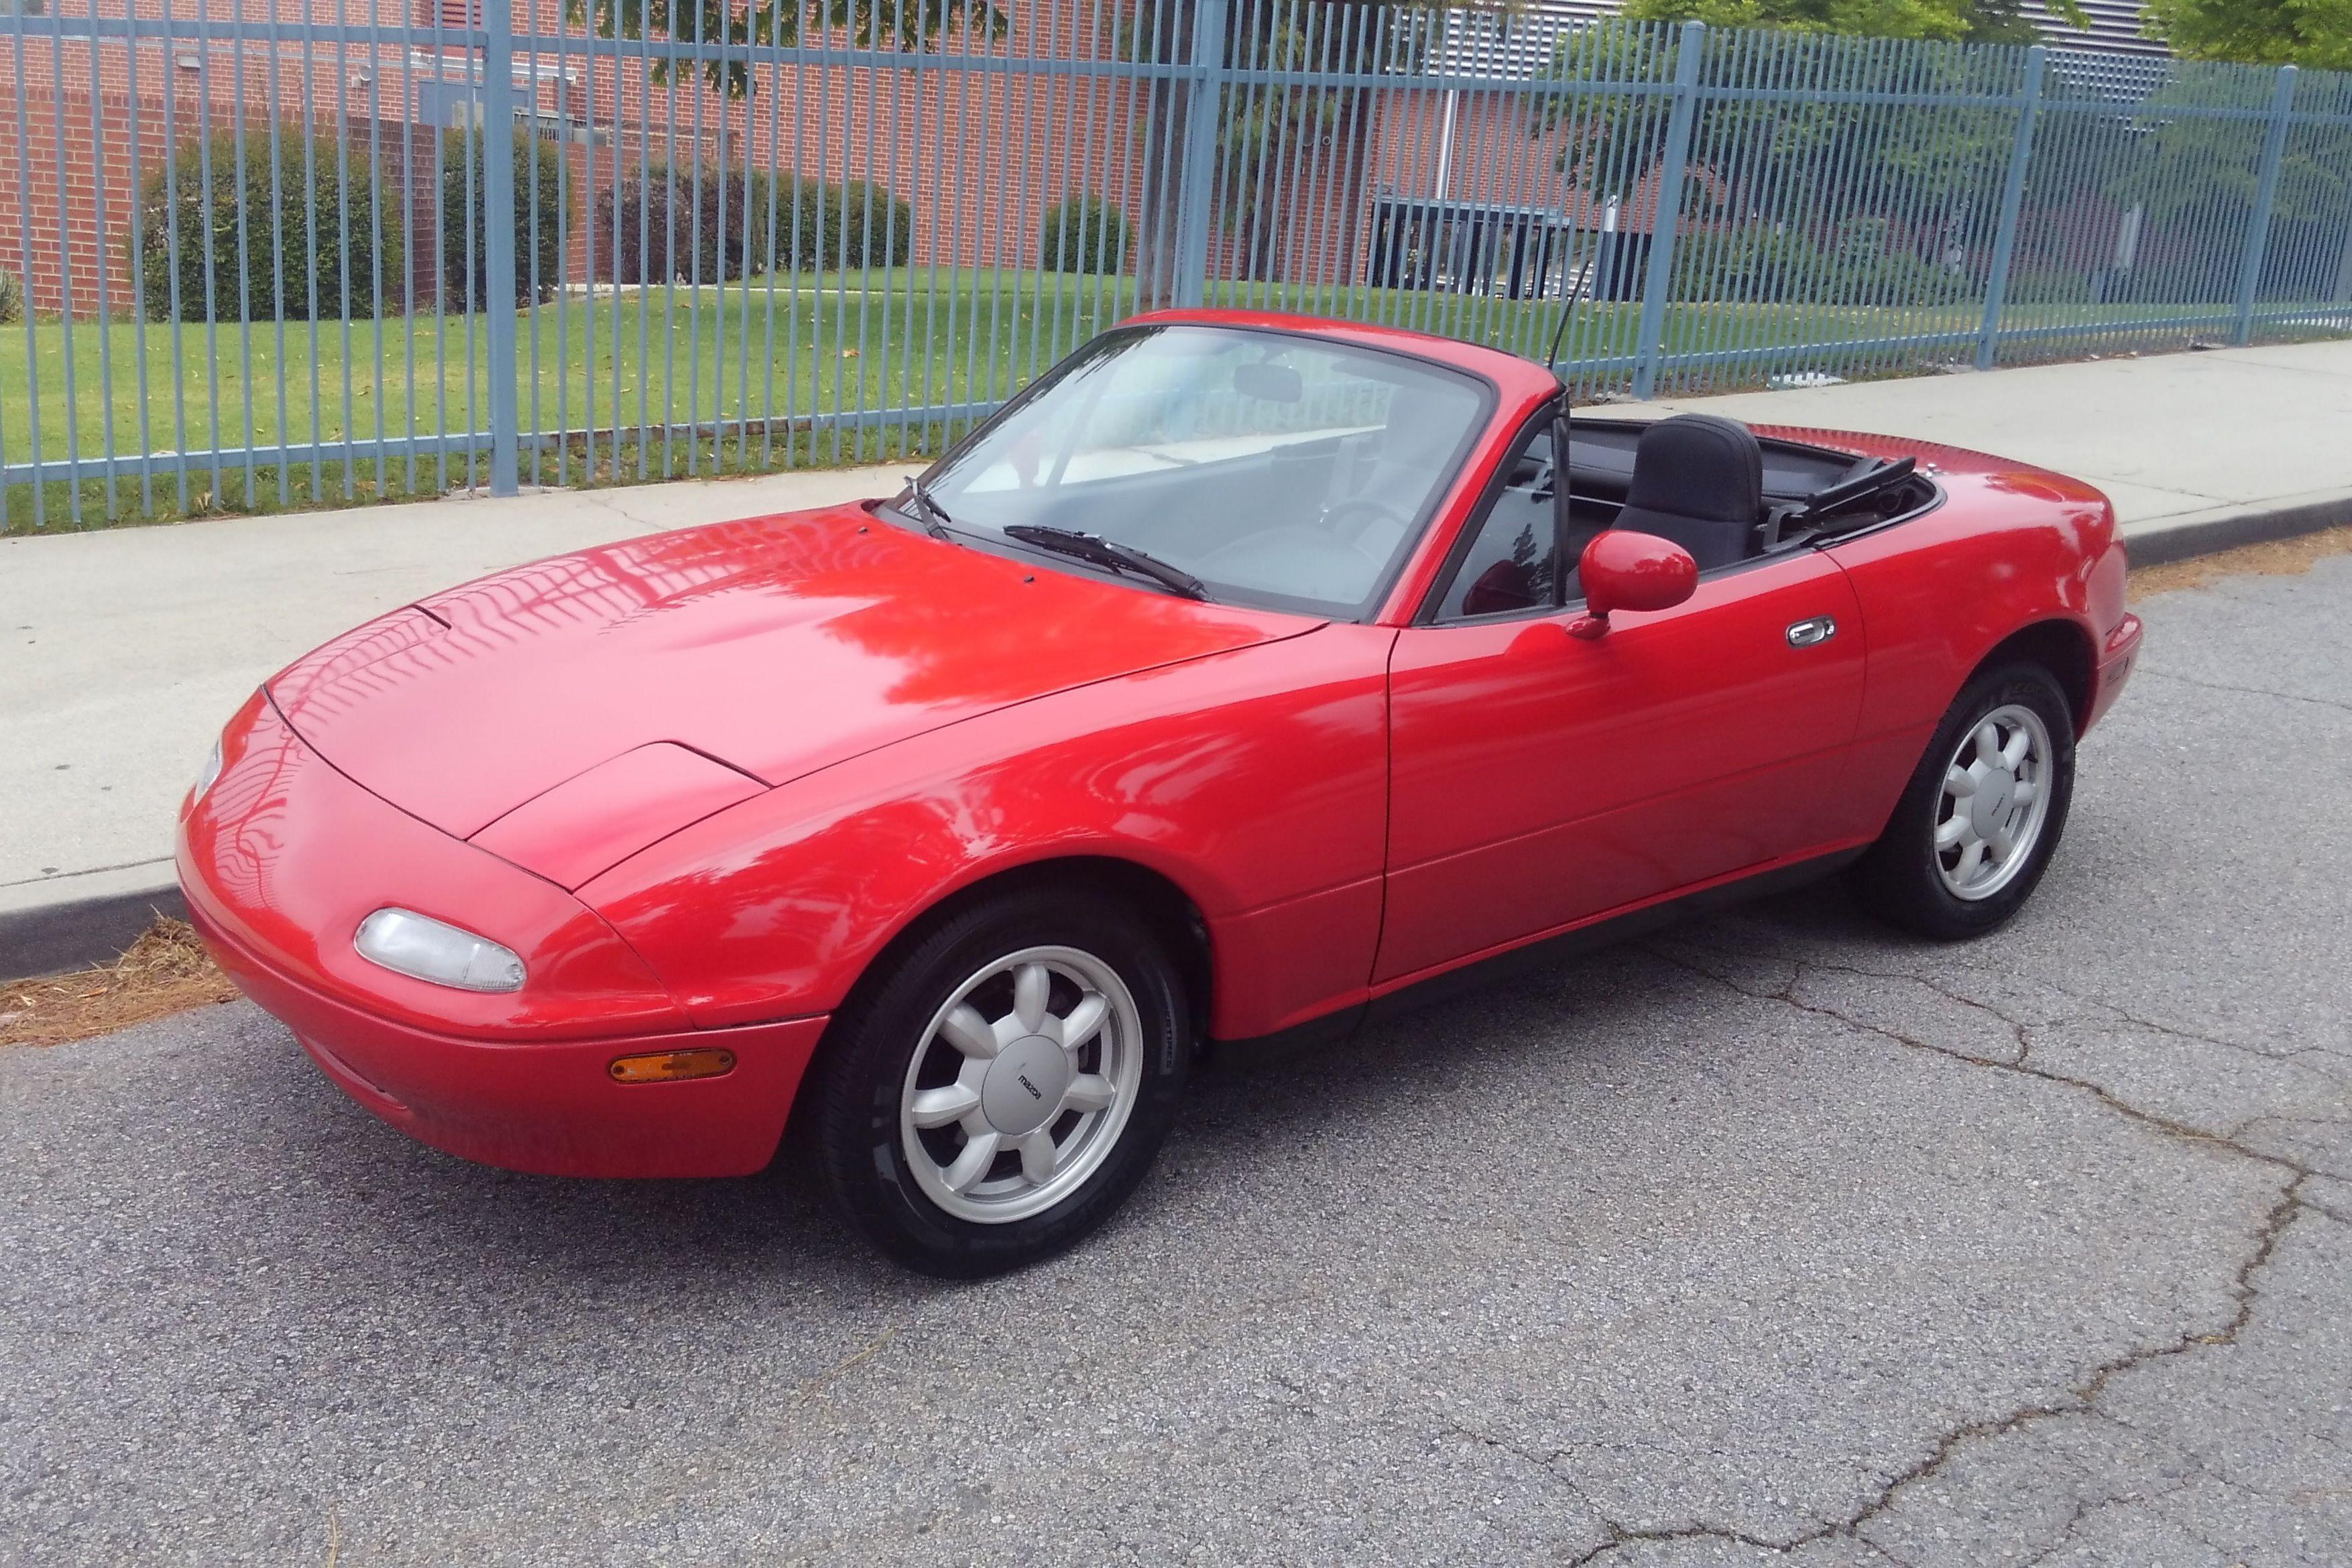 Ferrari or Miata? Thirty-some years later, it's the latter I still dream about